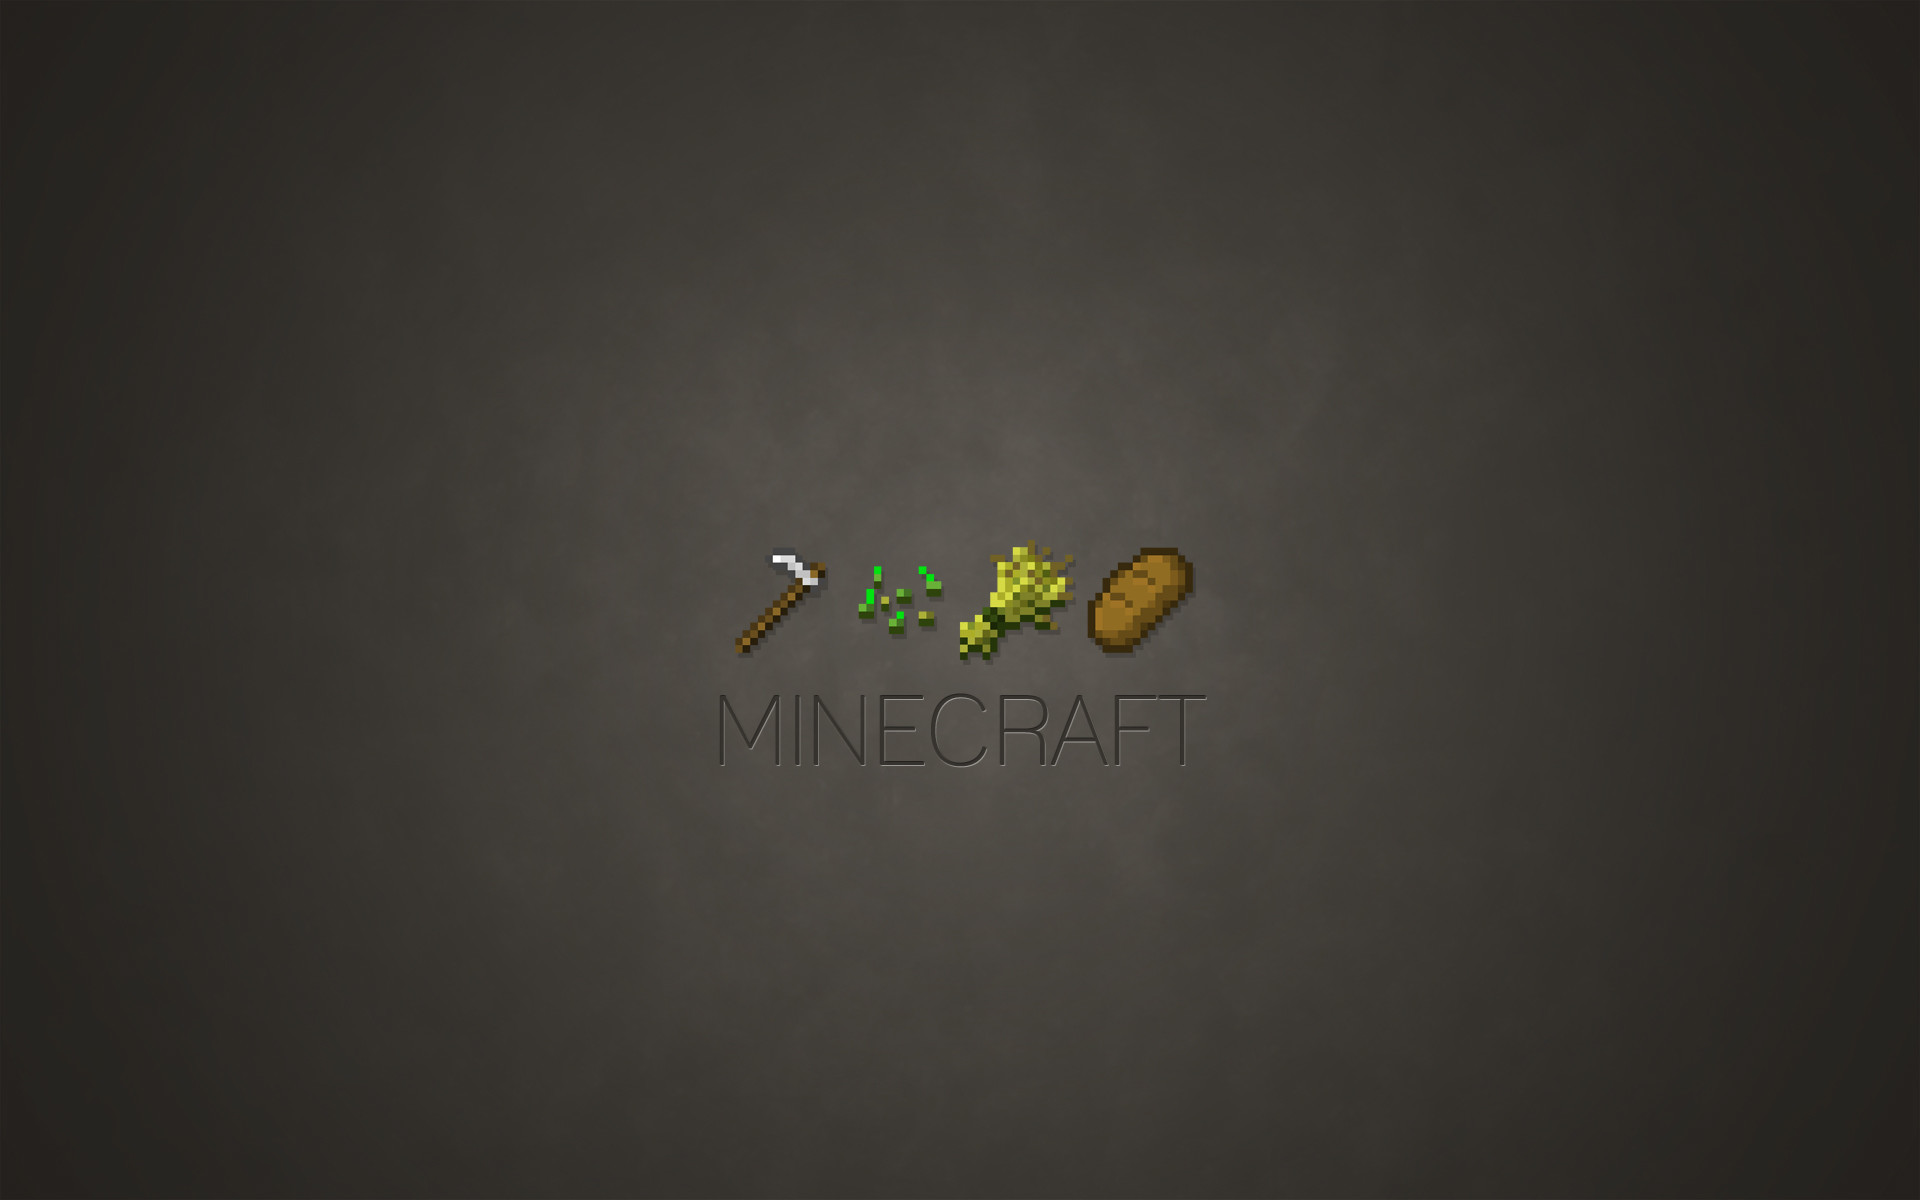 Minimalist Video Game Wallpaper (82+ images)